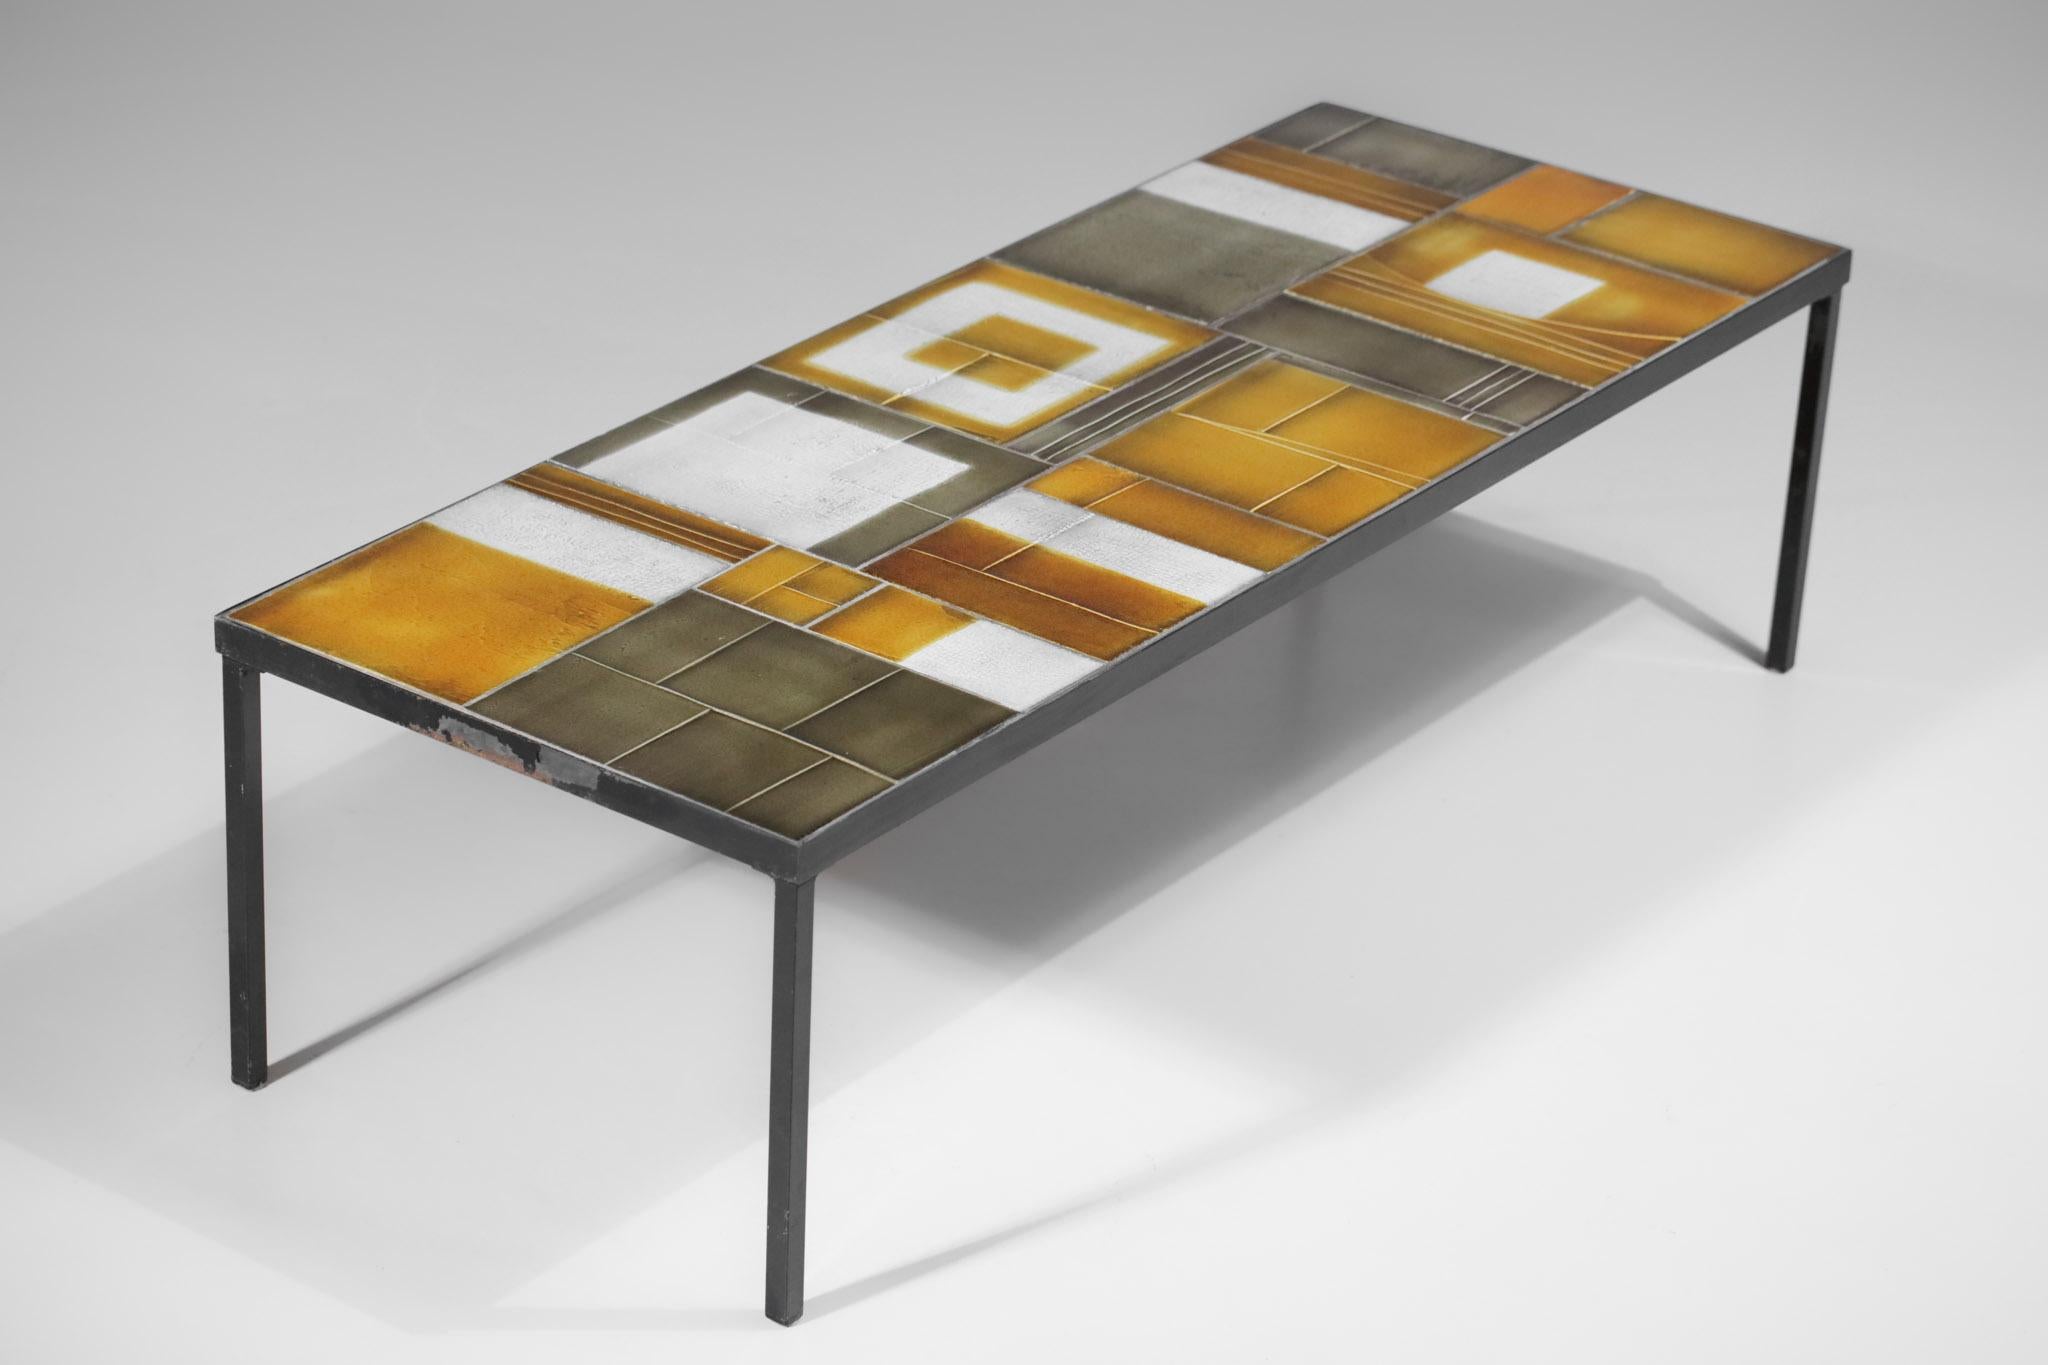 Large coffee table by the famous French ceramist Roger Capron from the 1960s with rather rare proportions. Steel structure and top made of ceramic tiles of different sizes representing very decorative abstract geometrical patterns. Tiles in very